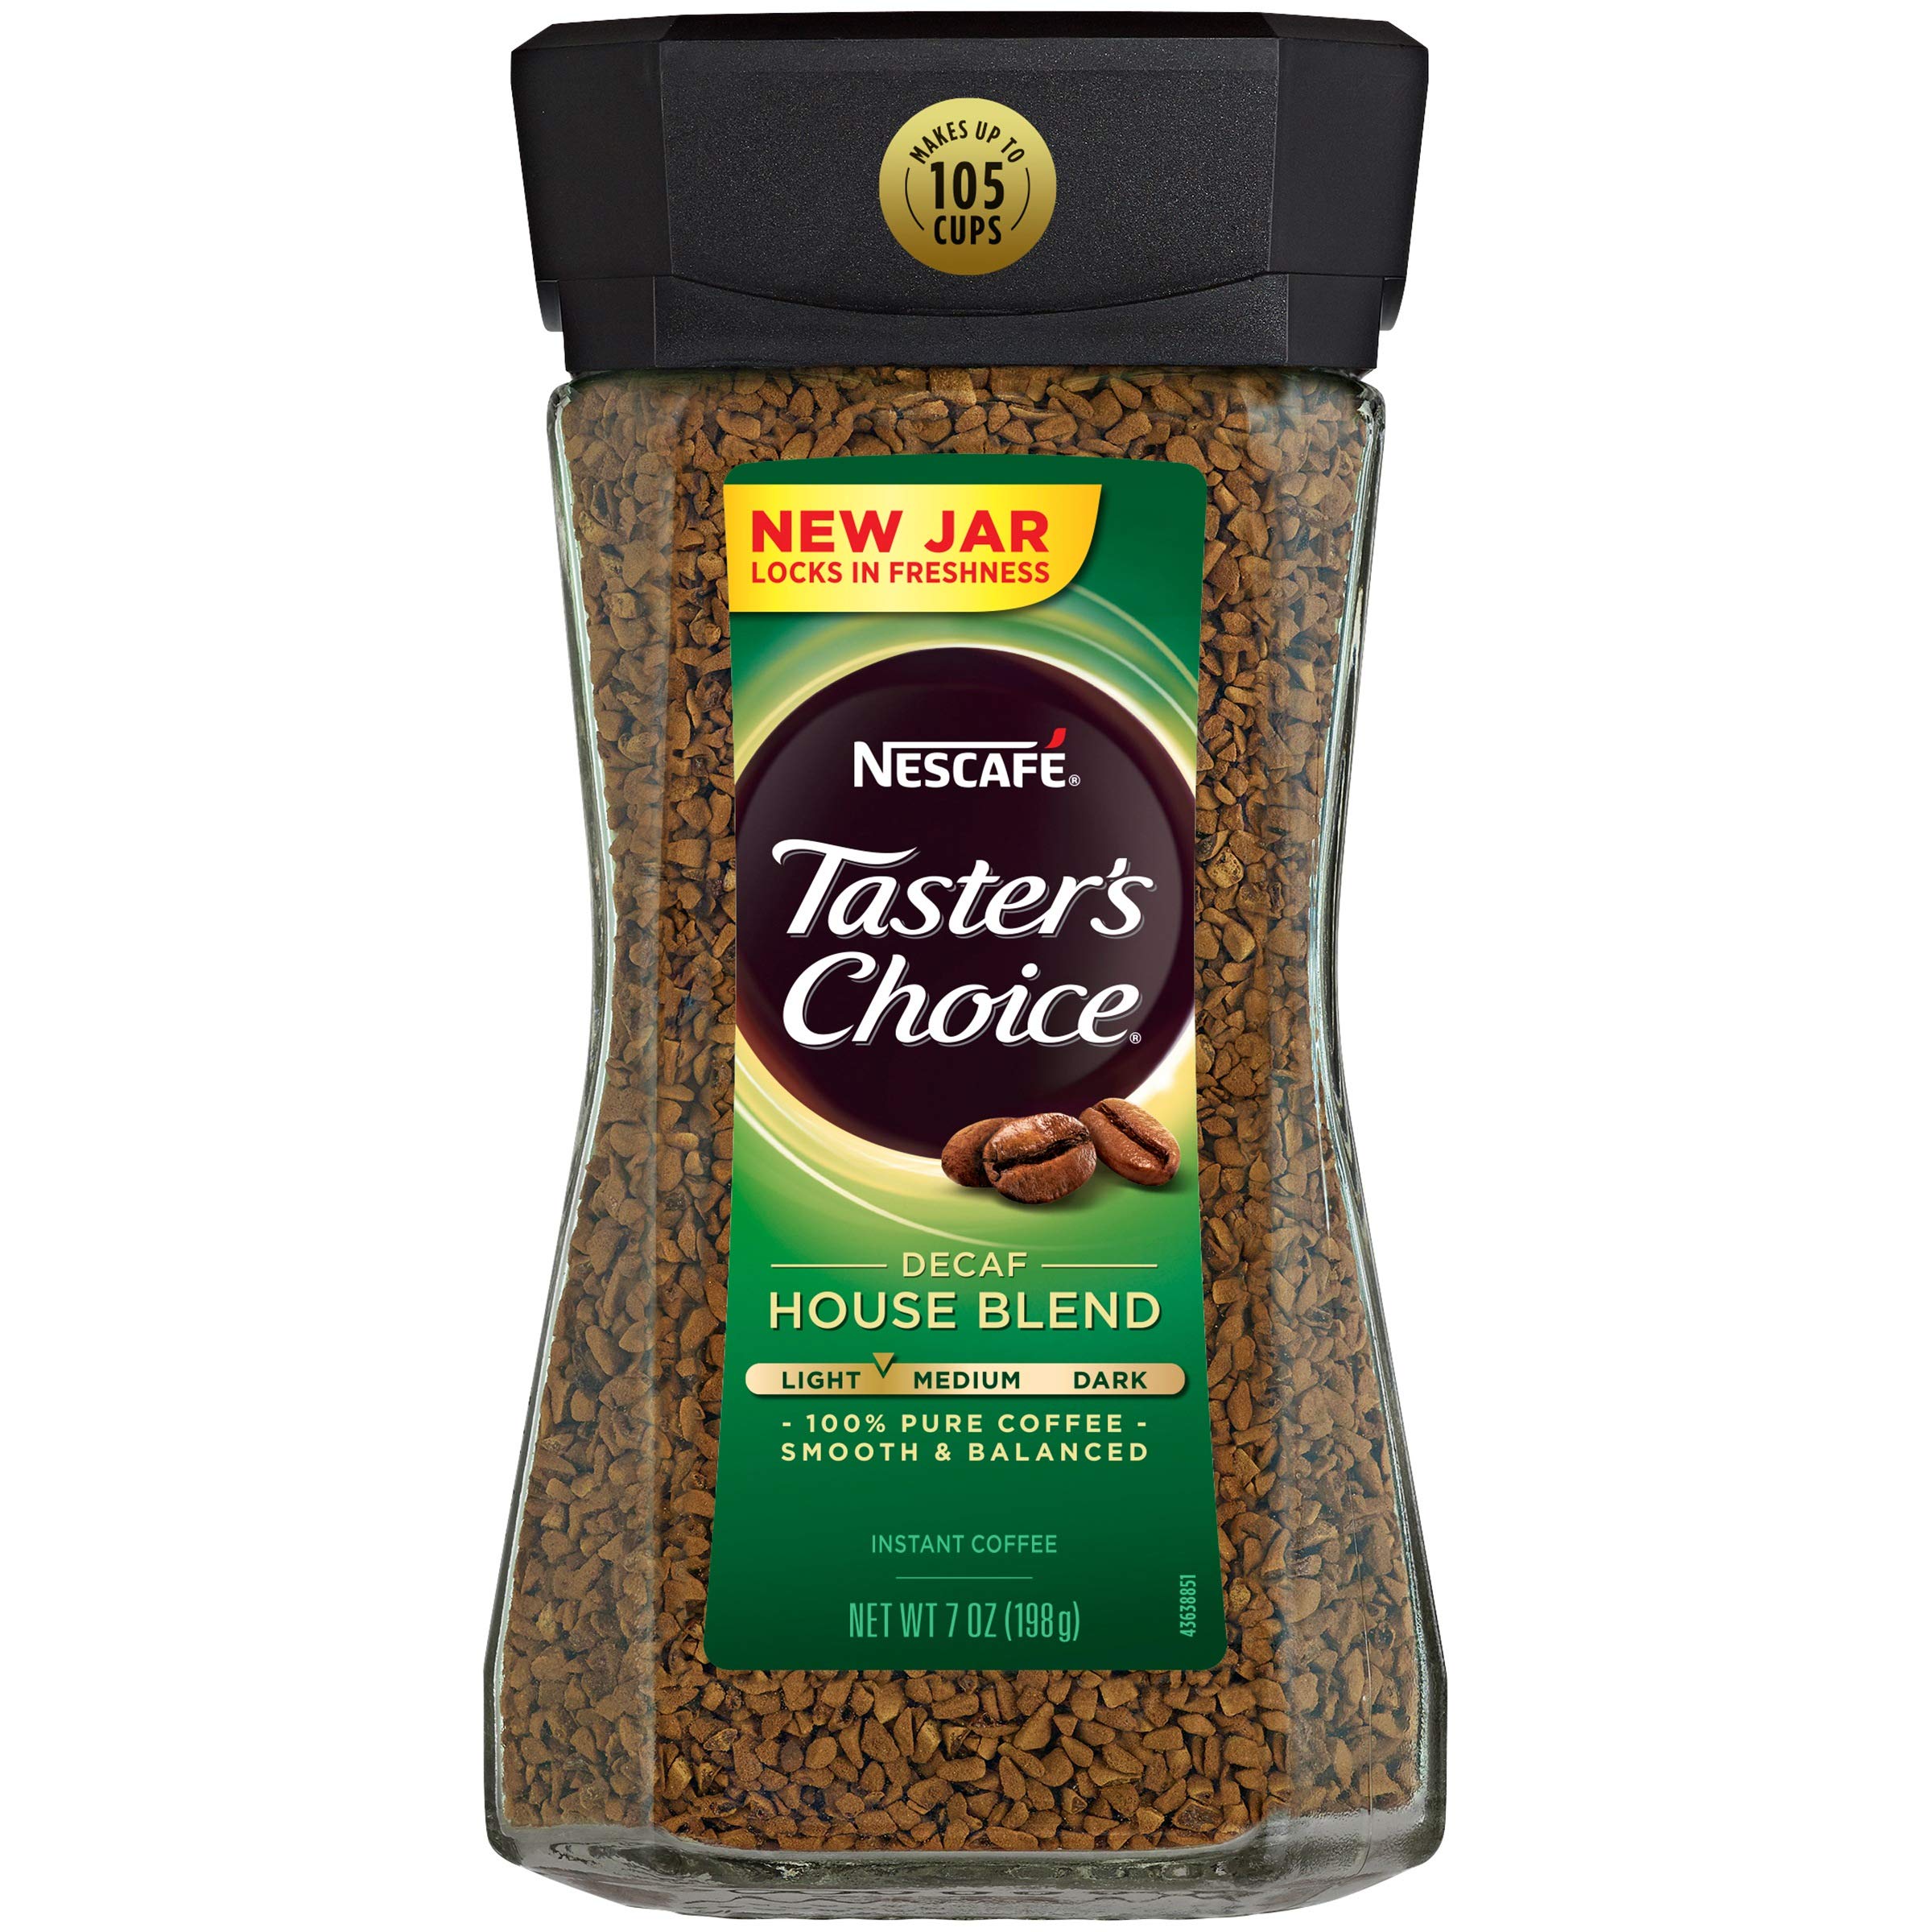 Nescafe Taster's Choice Instant Decaf Coffee, 7-Ounce Canisters (Pack of 3)